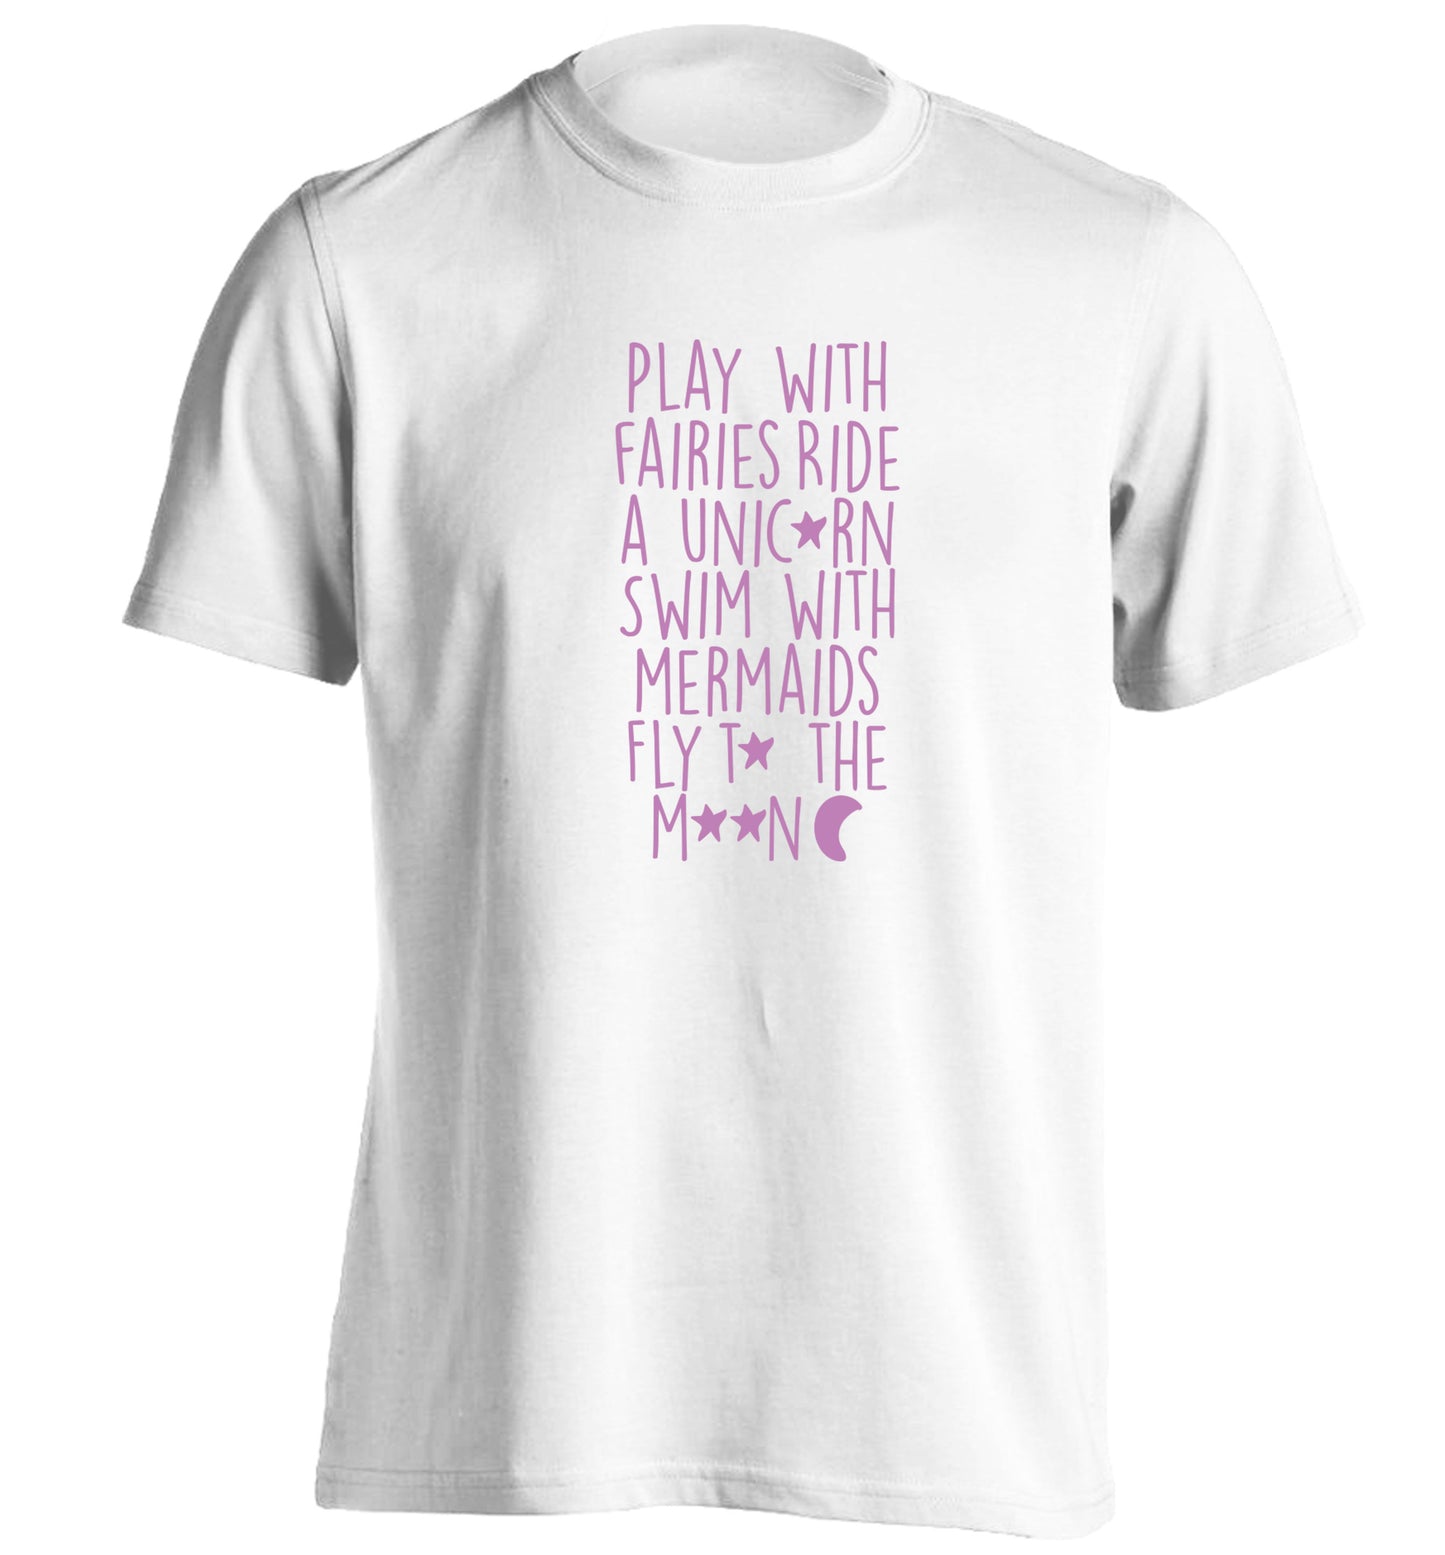 Play with fairies ride a unicorn swim with mermaids fly to the moon adults unisex white Tshirt 2XL